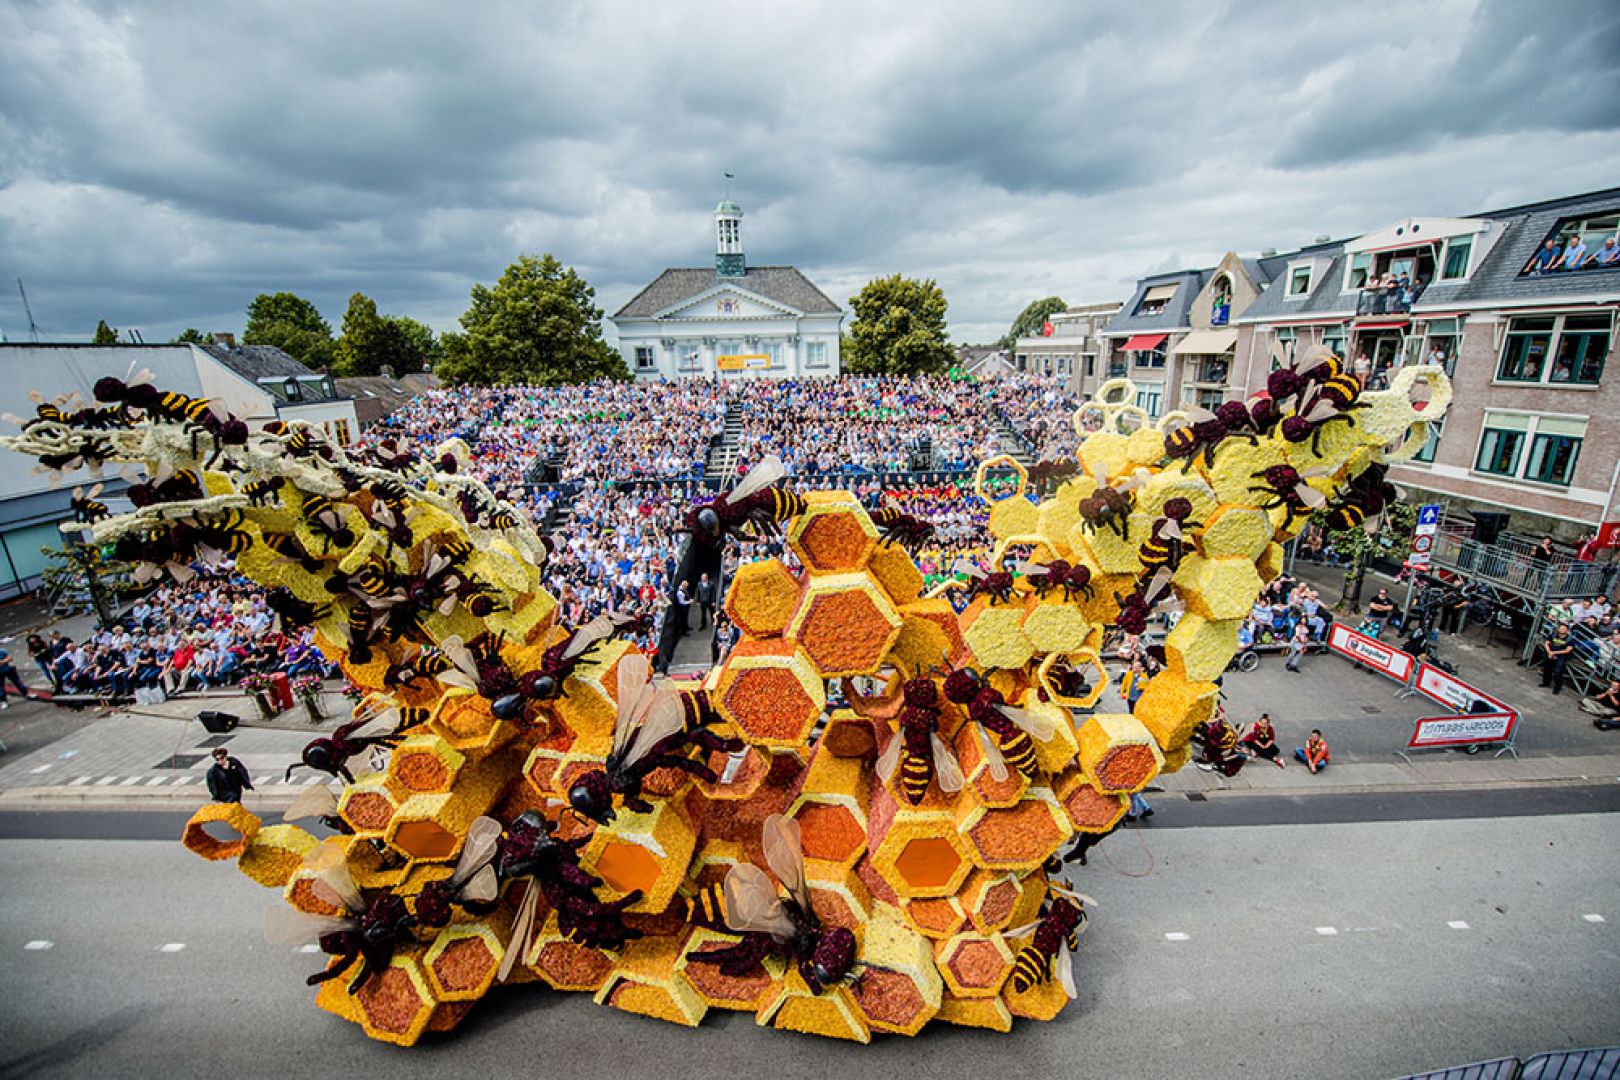 Dutch parade marks all things dangerous with giant floats made out of